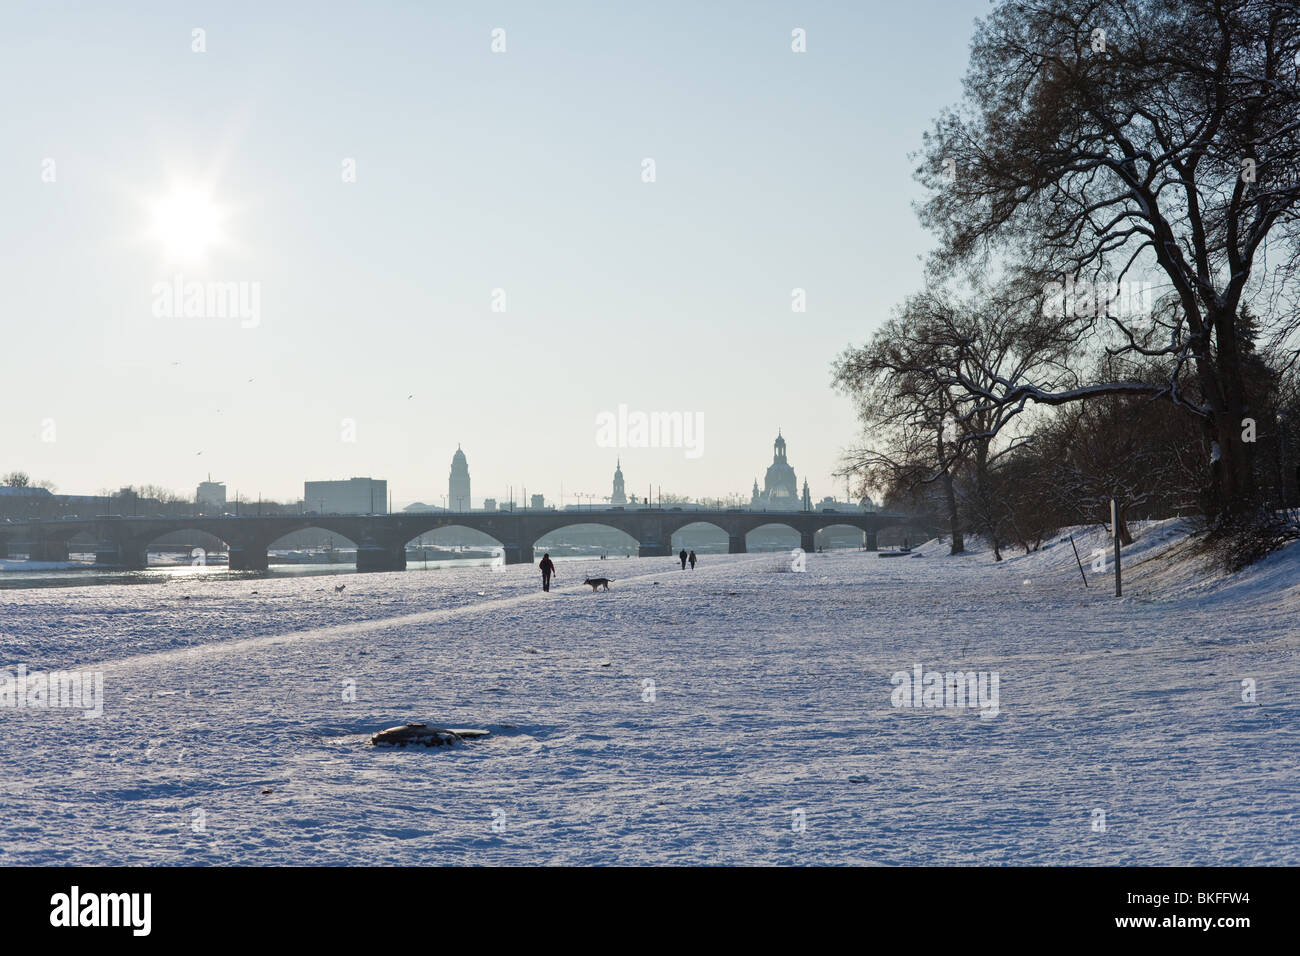 Winter scenery at the snow-covered banks of river Elbe in Dresden, Germany Stock Photo